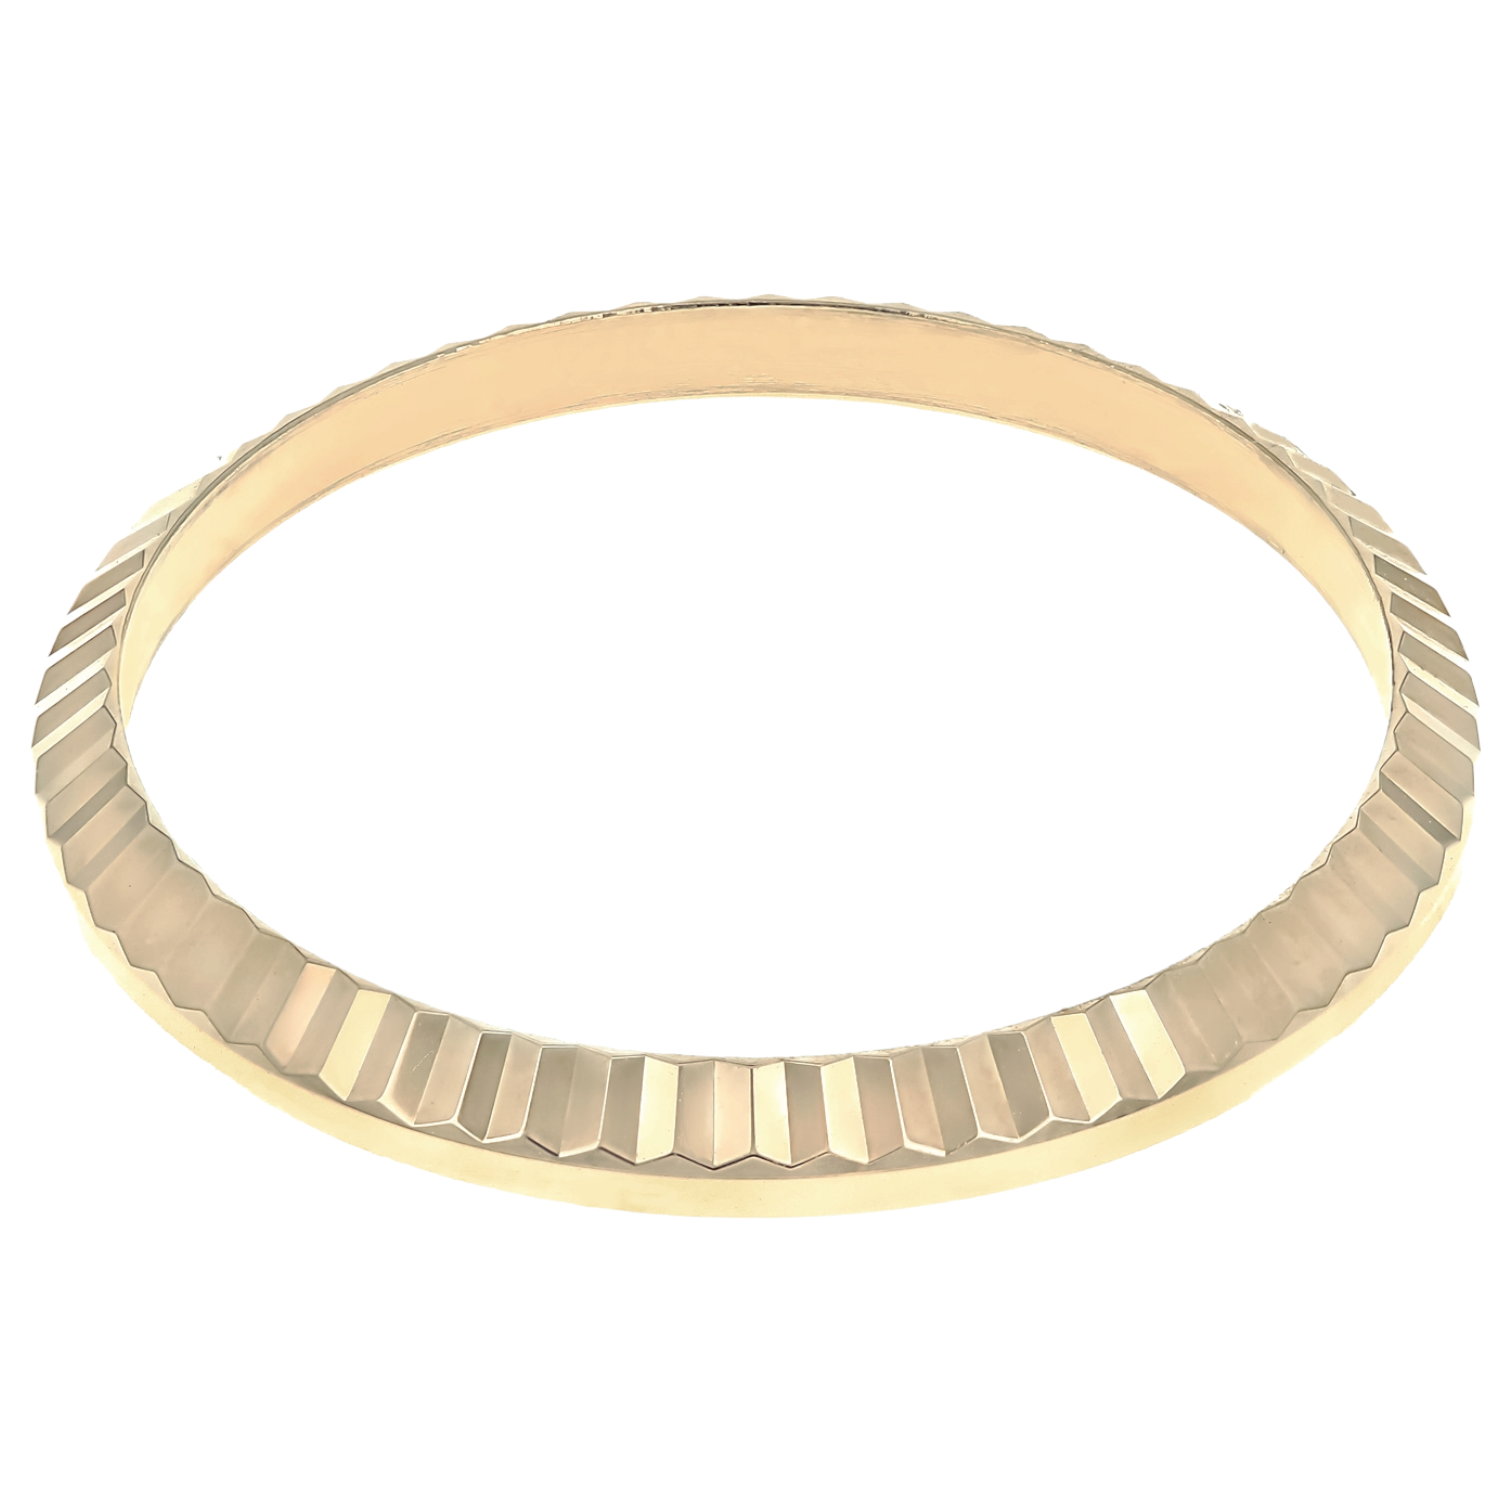 Rolex 18K Yellow Gold Fluted Bezel for 26mm Datejust. (Rolex Accessory)